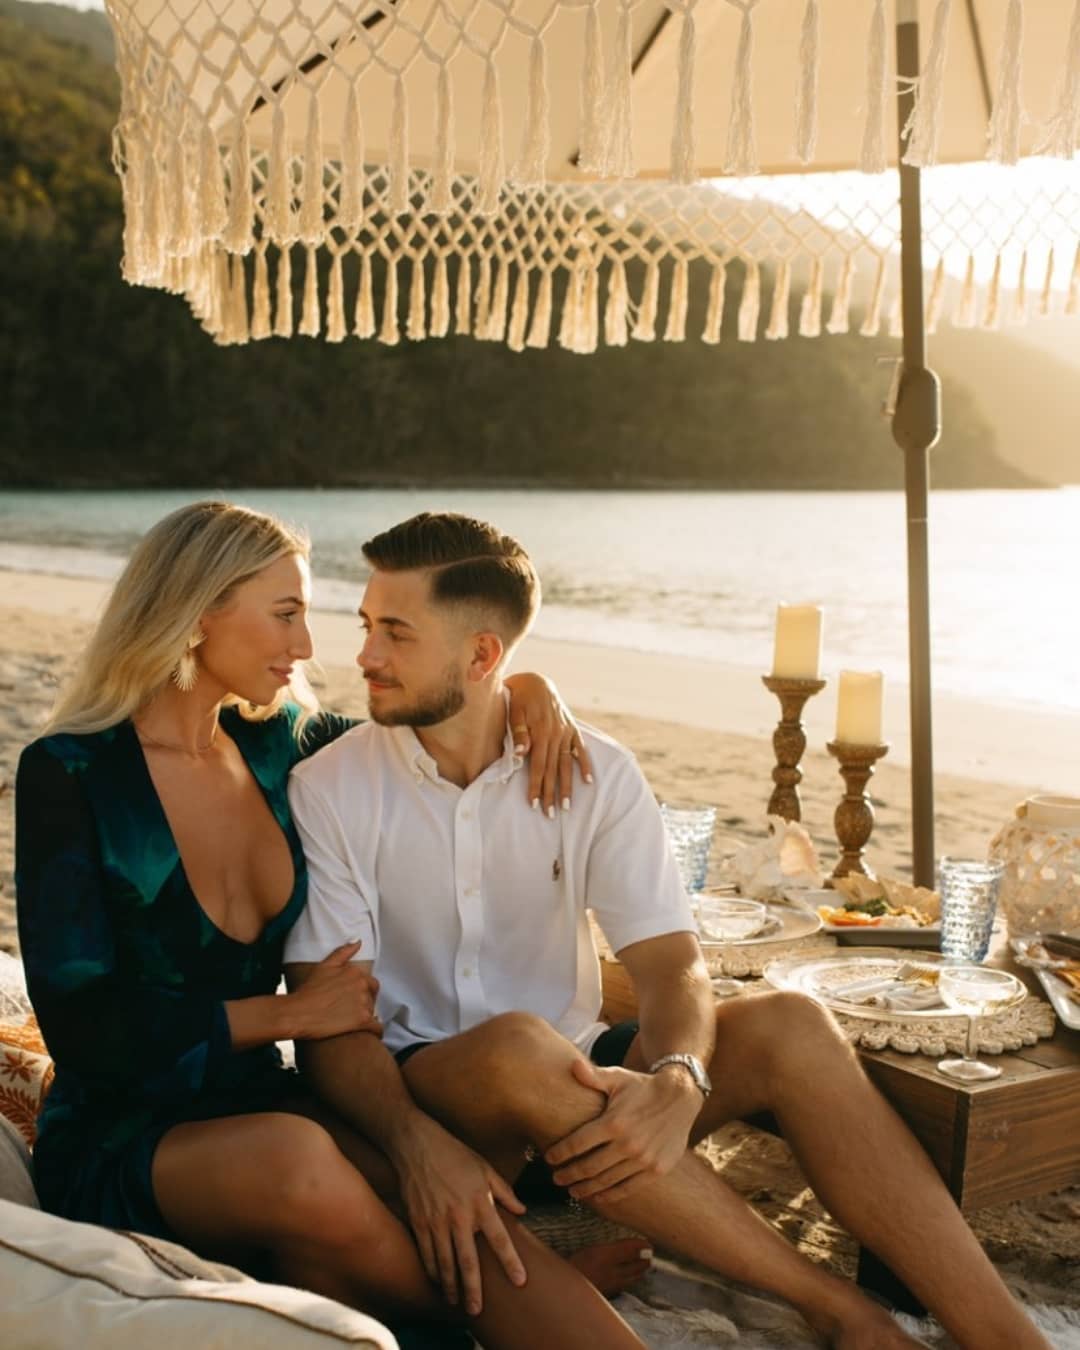 Check out more from this engagement in today's stories or over at @kellipeevey These beach setups give me sweet butterflies! So fun to be a part of these magical moments.